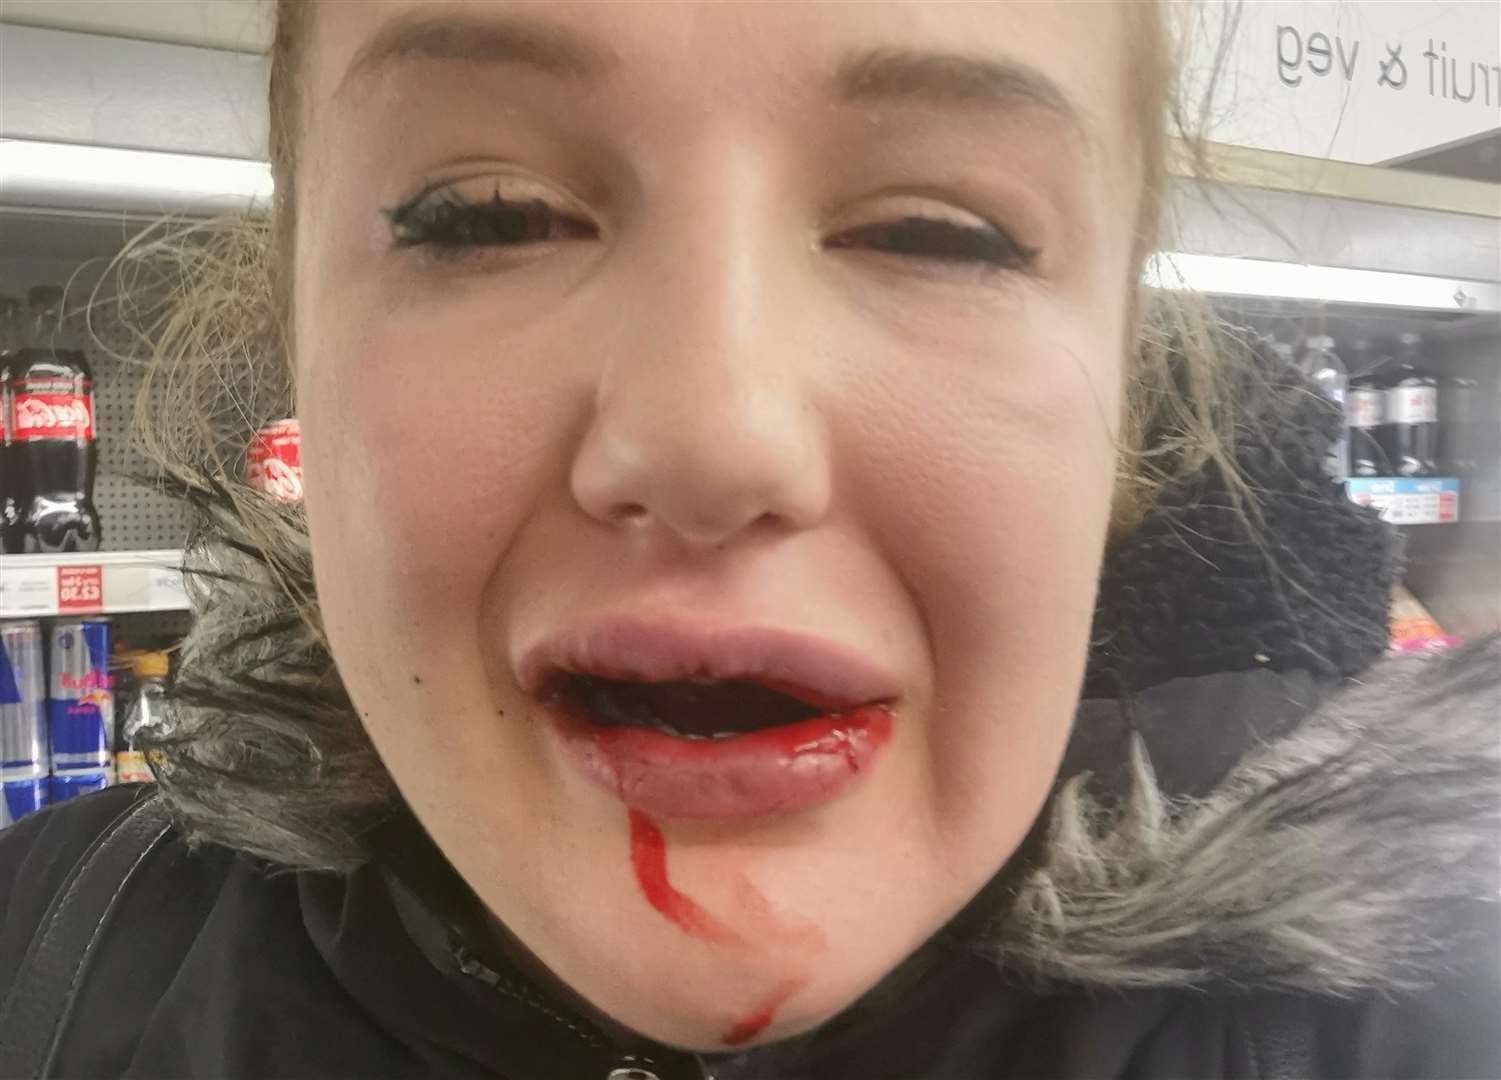 Holly was riding home from work when the attack happened